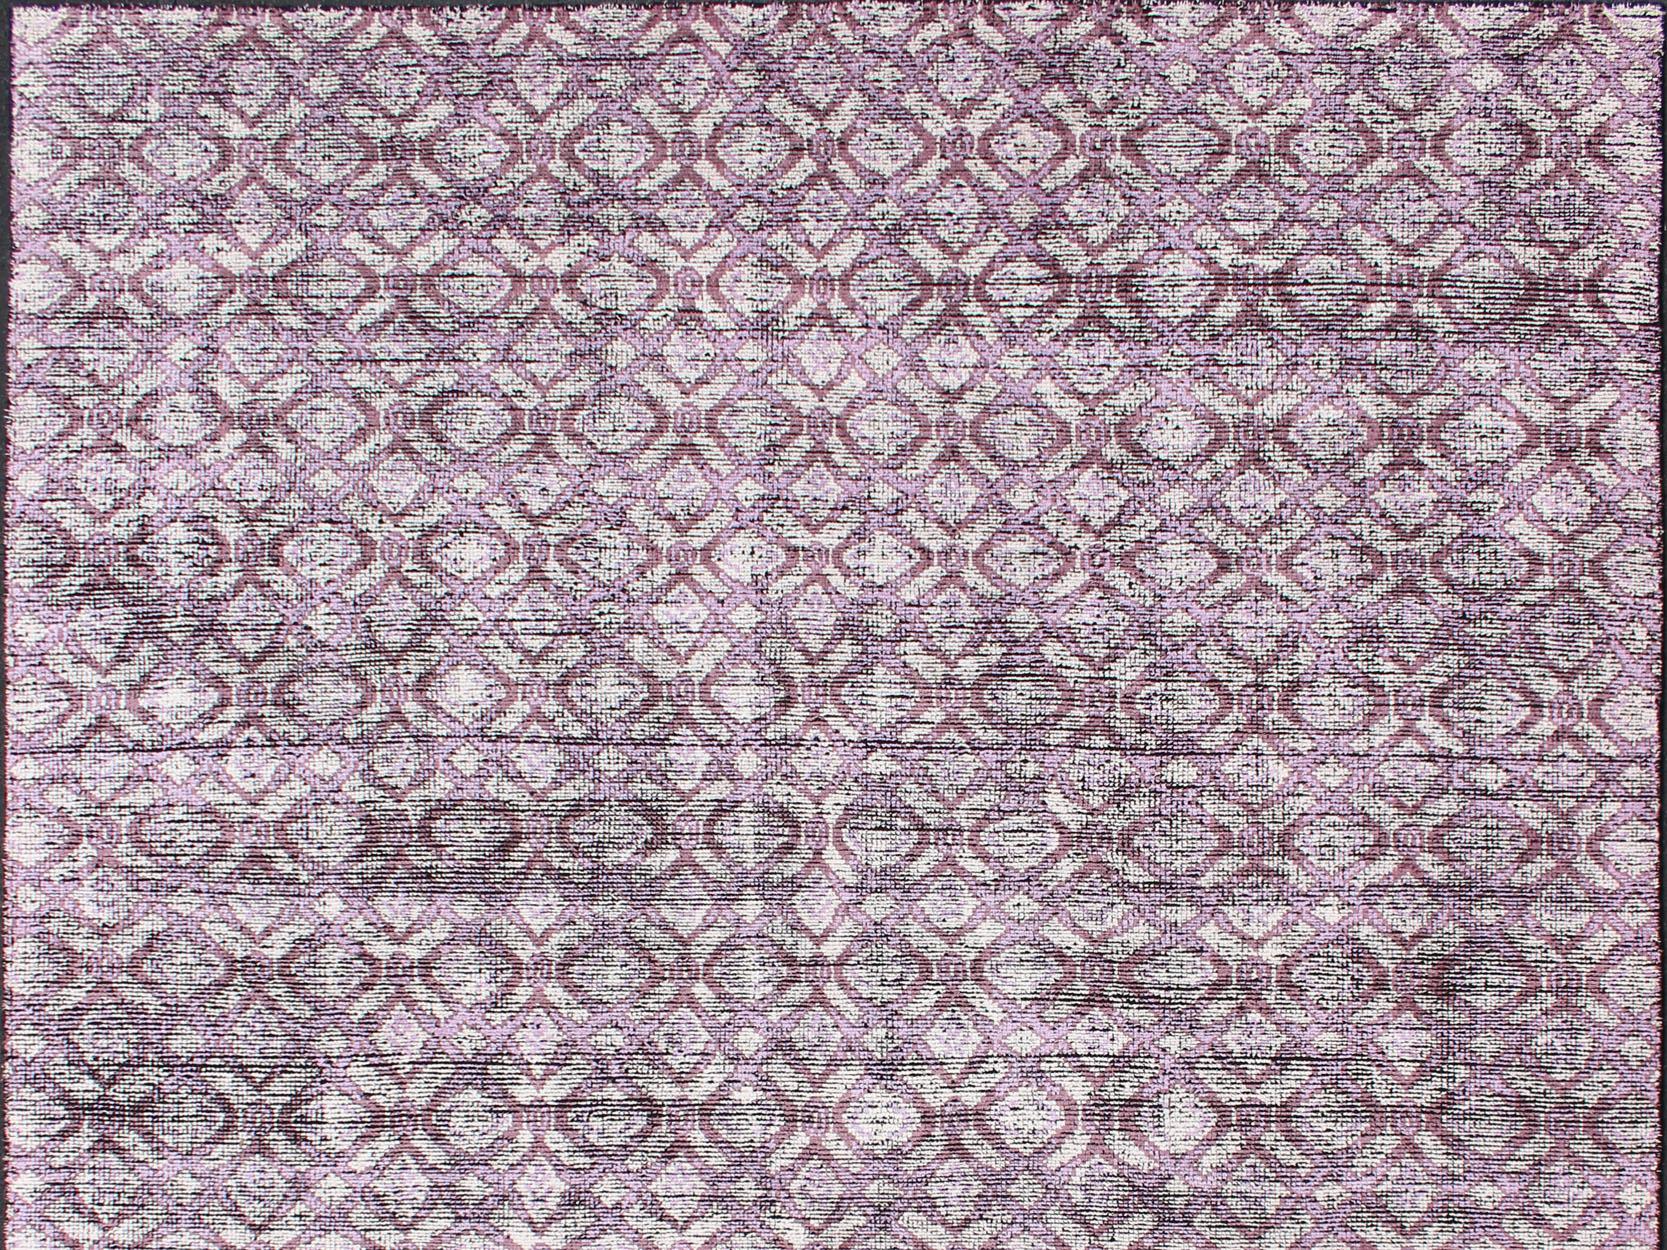 Multi shades of white, cream, light purple, and gray with charcoal foundation showing in this unique modern distressed piled rug. Silk Modern Distressed Rug in Light Purple by Keivan Woven Arts  rug KHN-1024-ARI-13, country of origin / type: India /